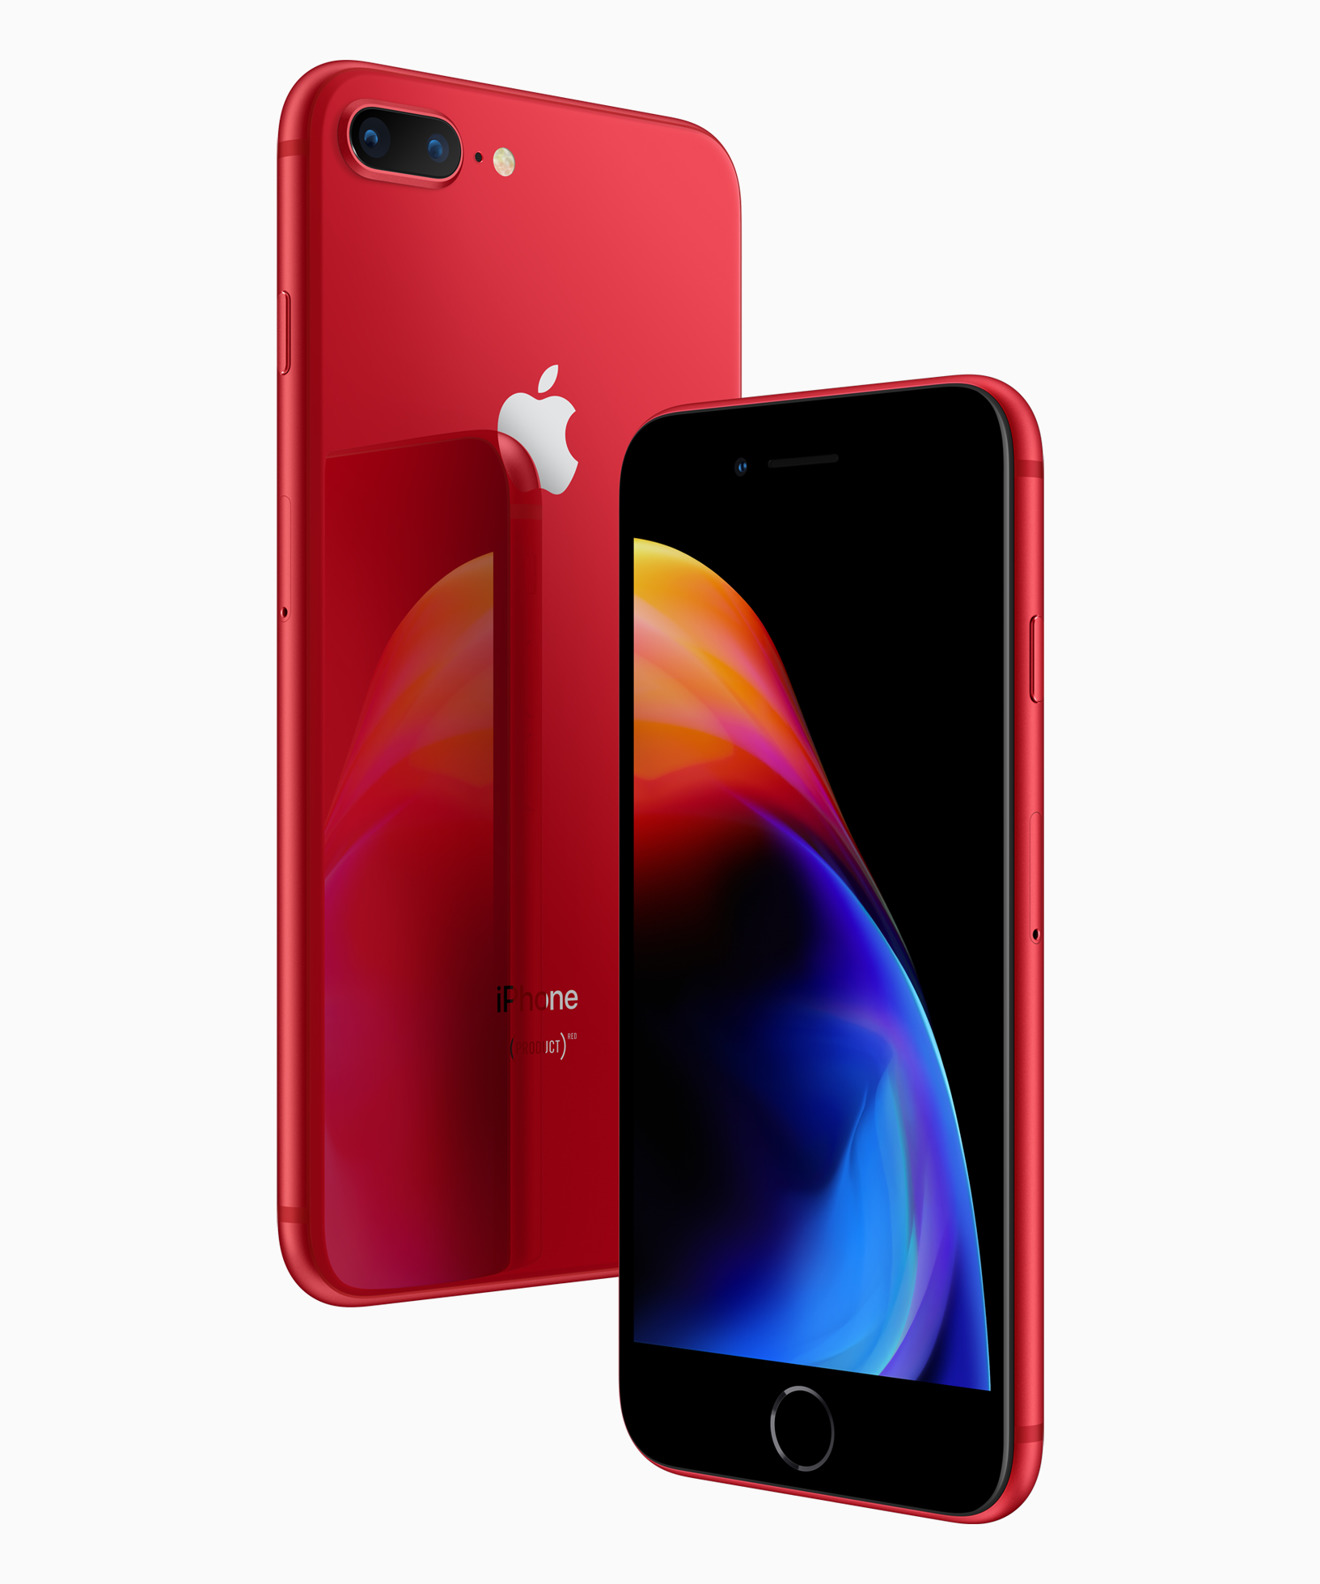 iPhone 8 and iPhone 8 Plus (PRODUCT)RED Special Edition ships on 